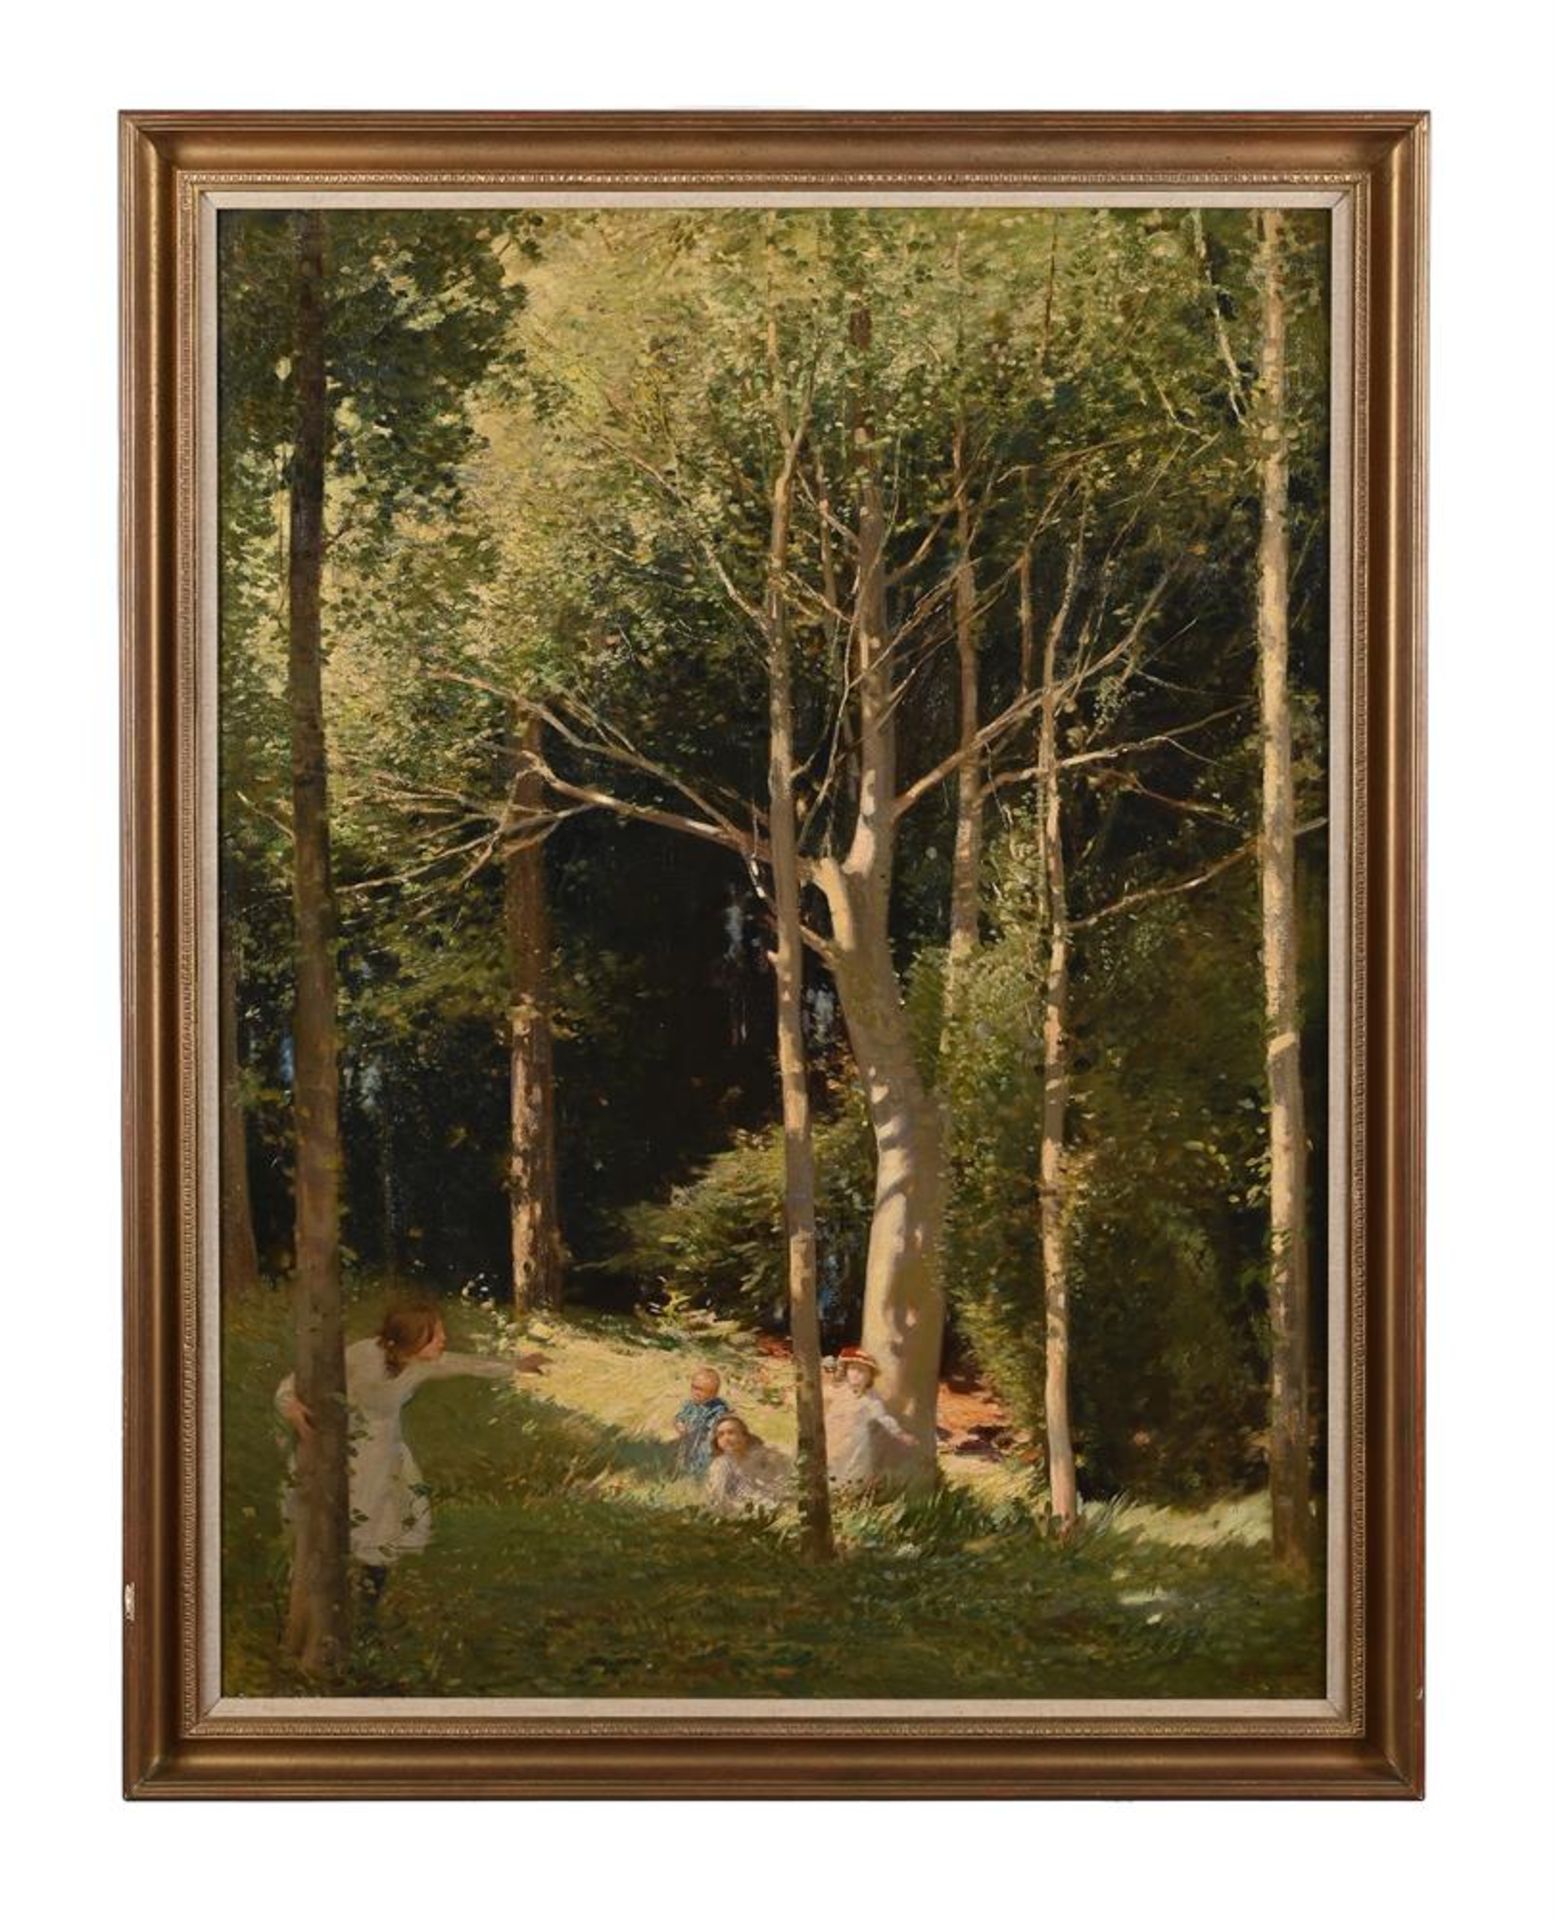 HARRY WATSON (BRITISH 1871-1936), CHILDREN PLAYING IN A SUNLIT WOOD - Image 2 of 3